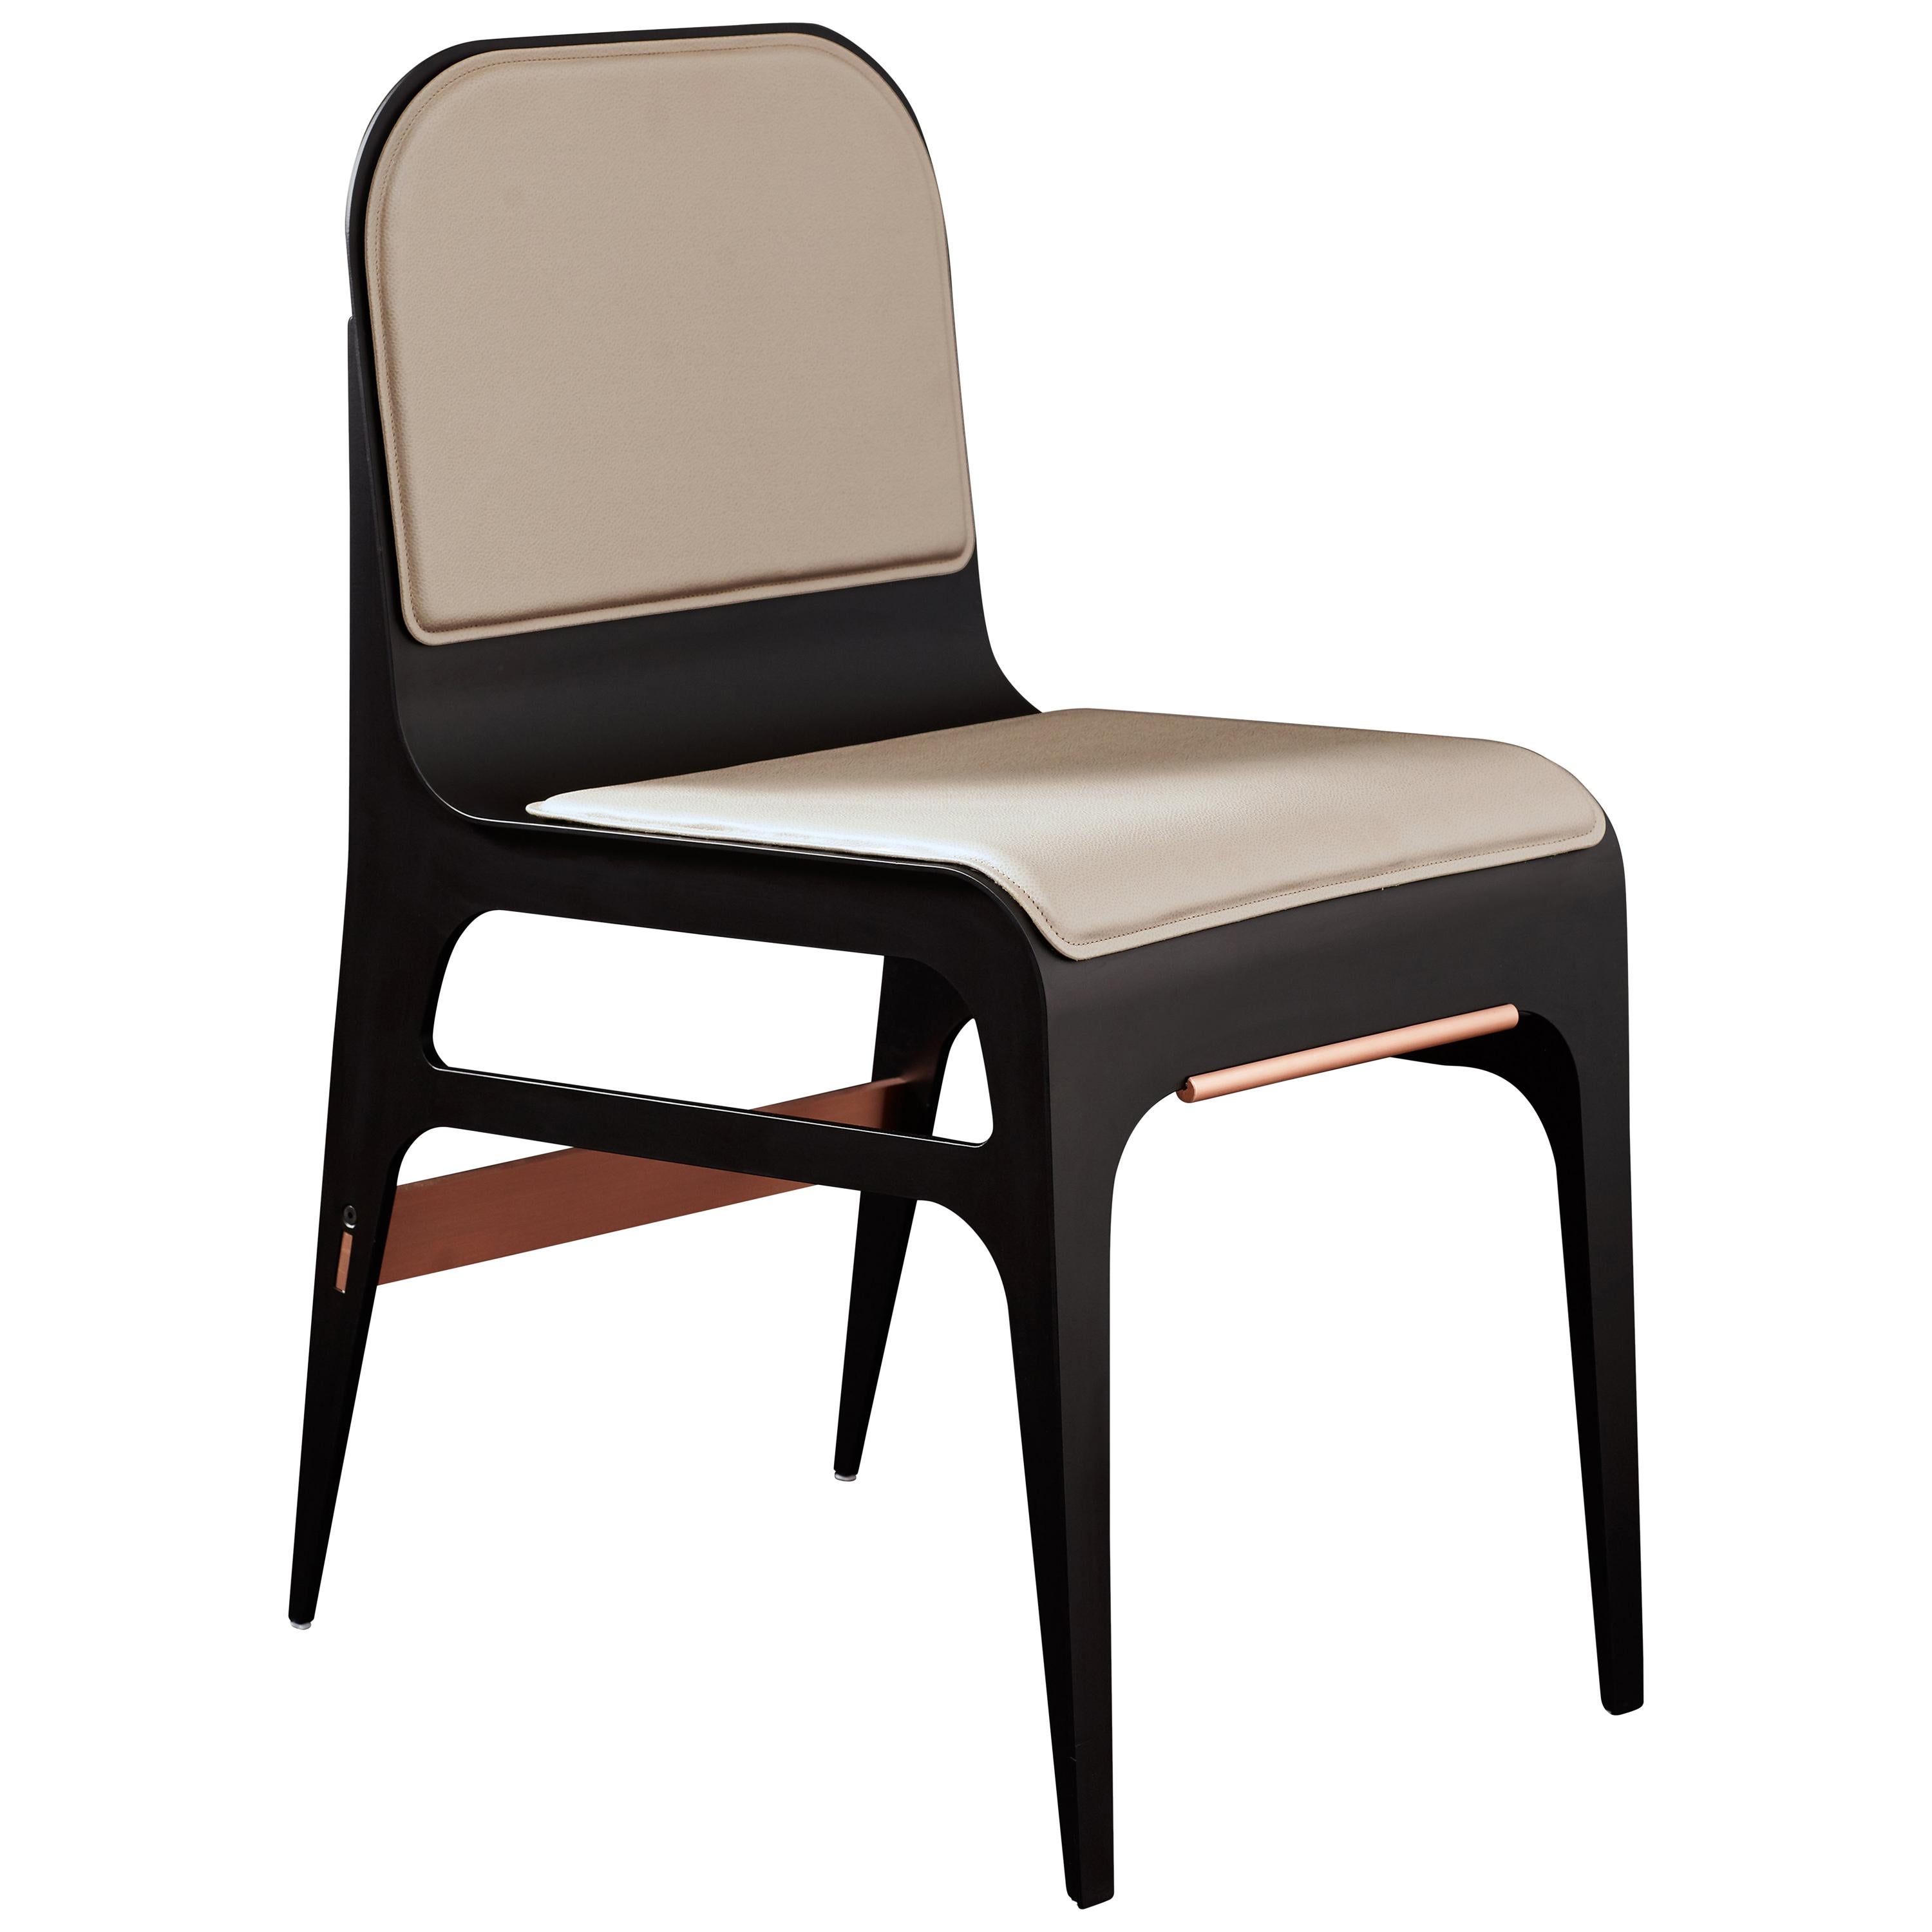 Bardot Dining Chair with Leather Seat and Satin Copper Hardware by Gabriel Scott